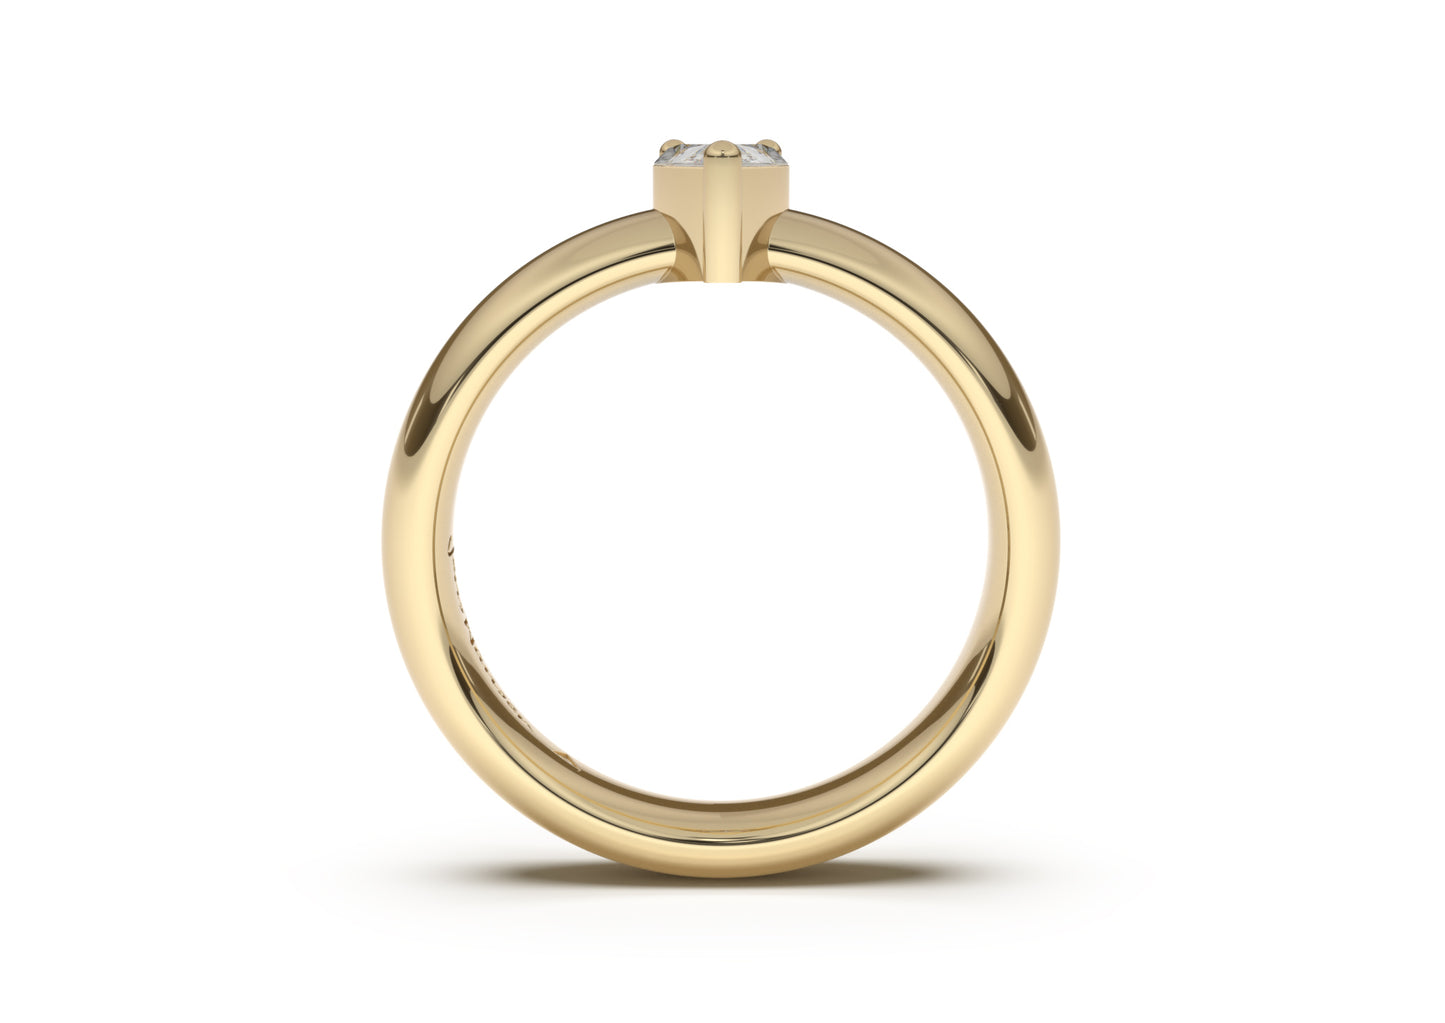 Pear Classic Engagement Ring, Yellow Gold